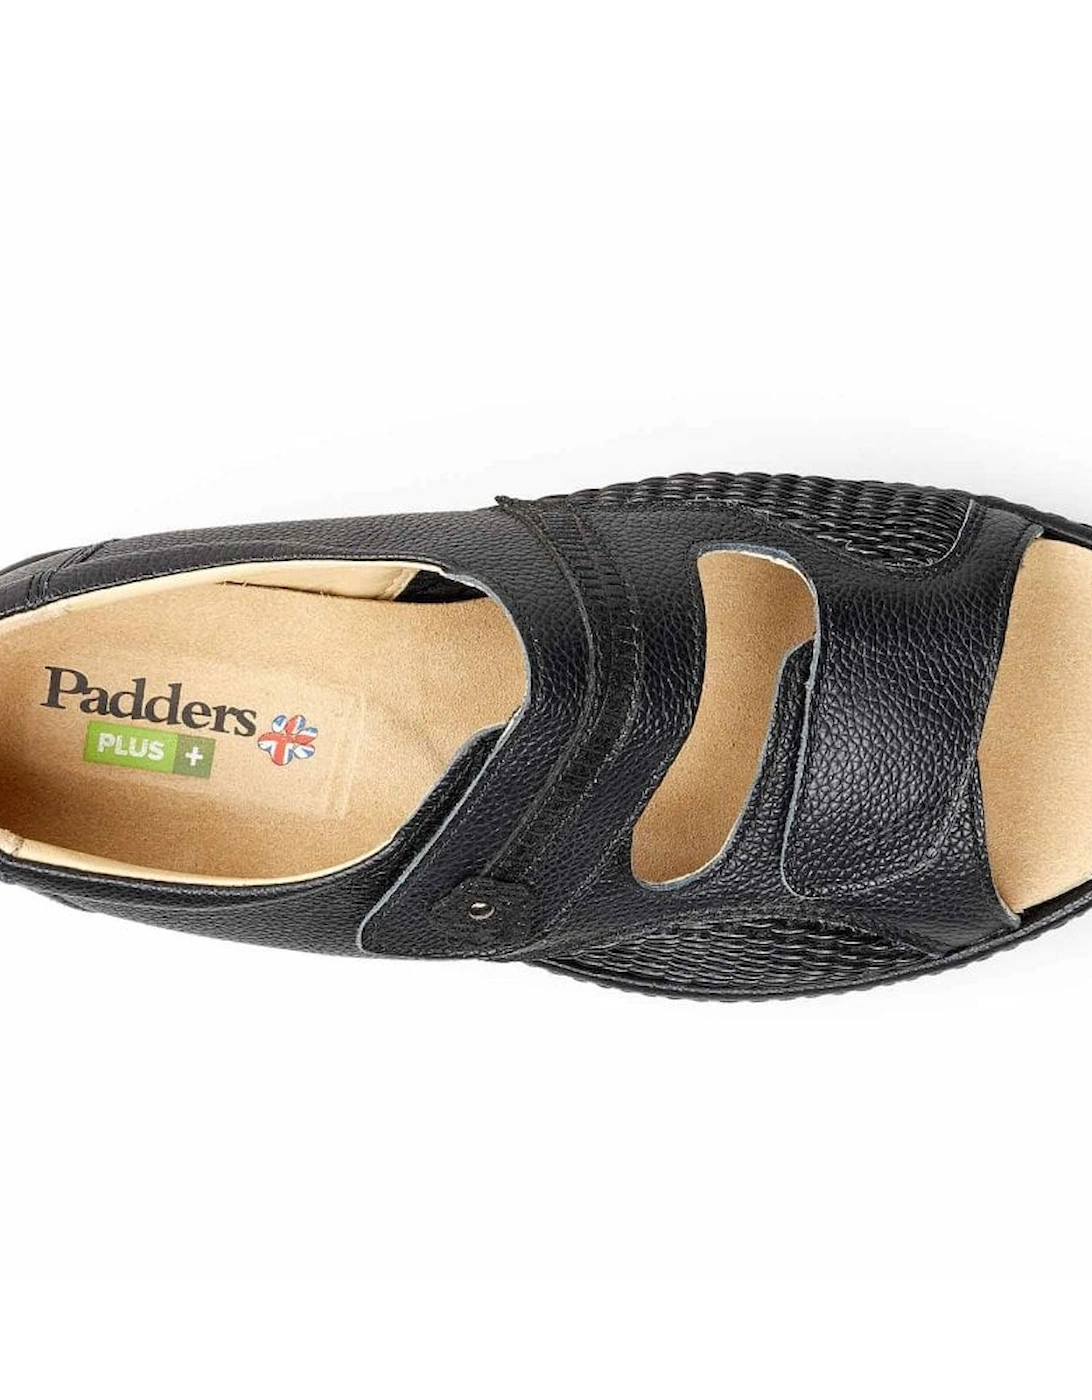 Peaceful Womens Wide Fit Sandals